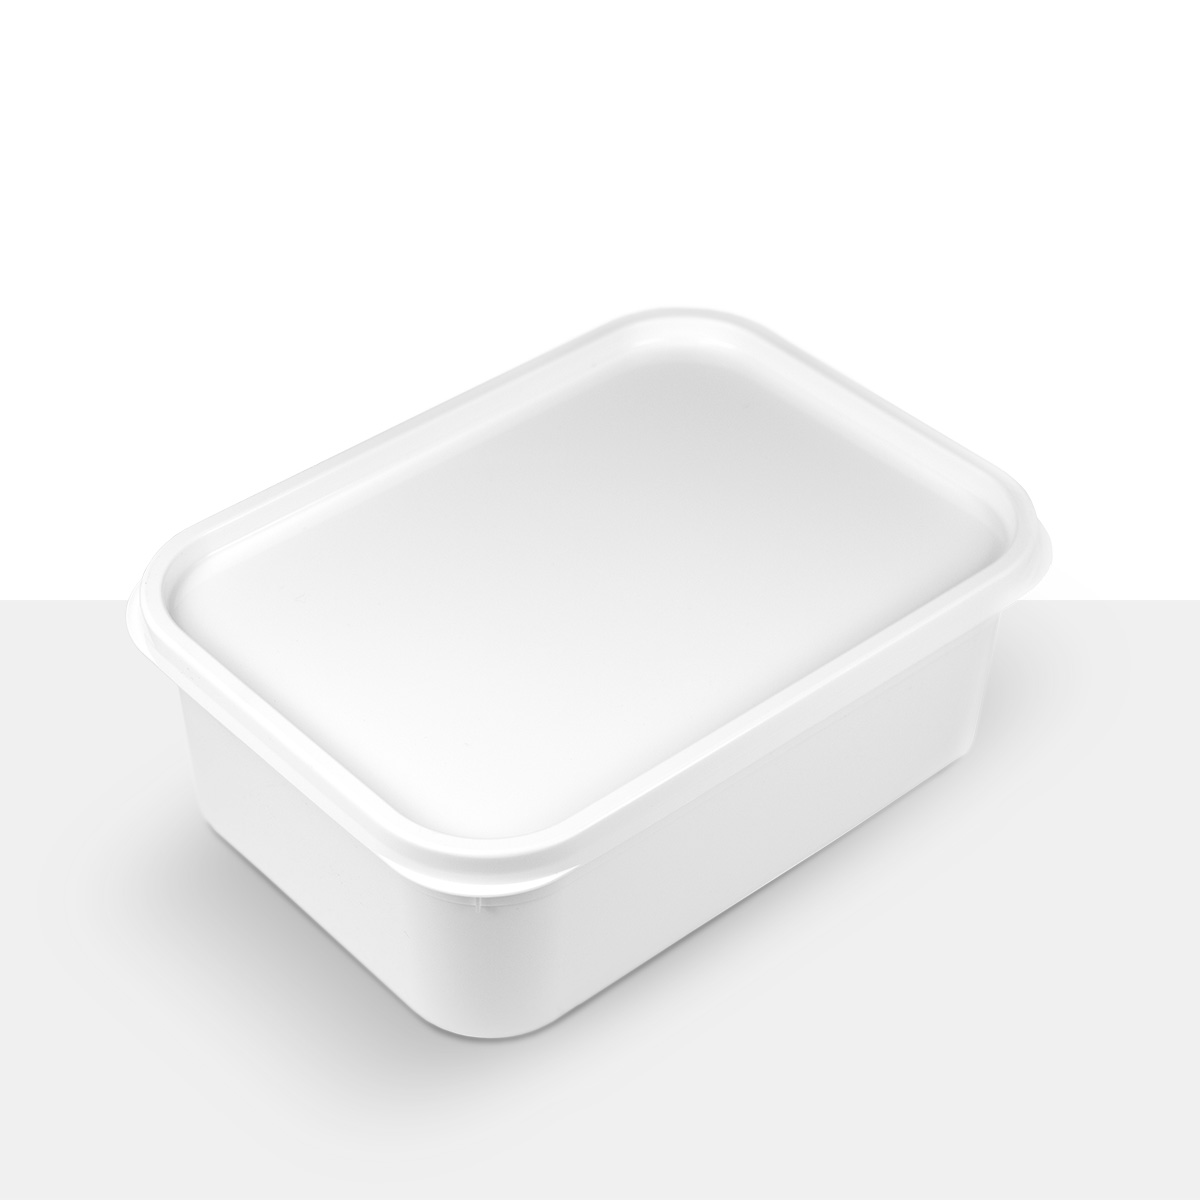 Food containers Northern Ireland, Scotland 2 Litre Rectangular Ice Cream Tubs